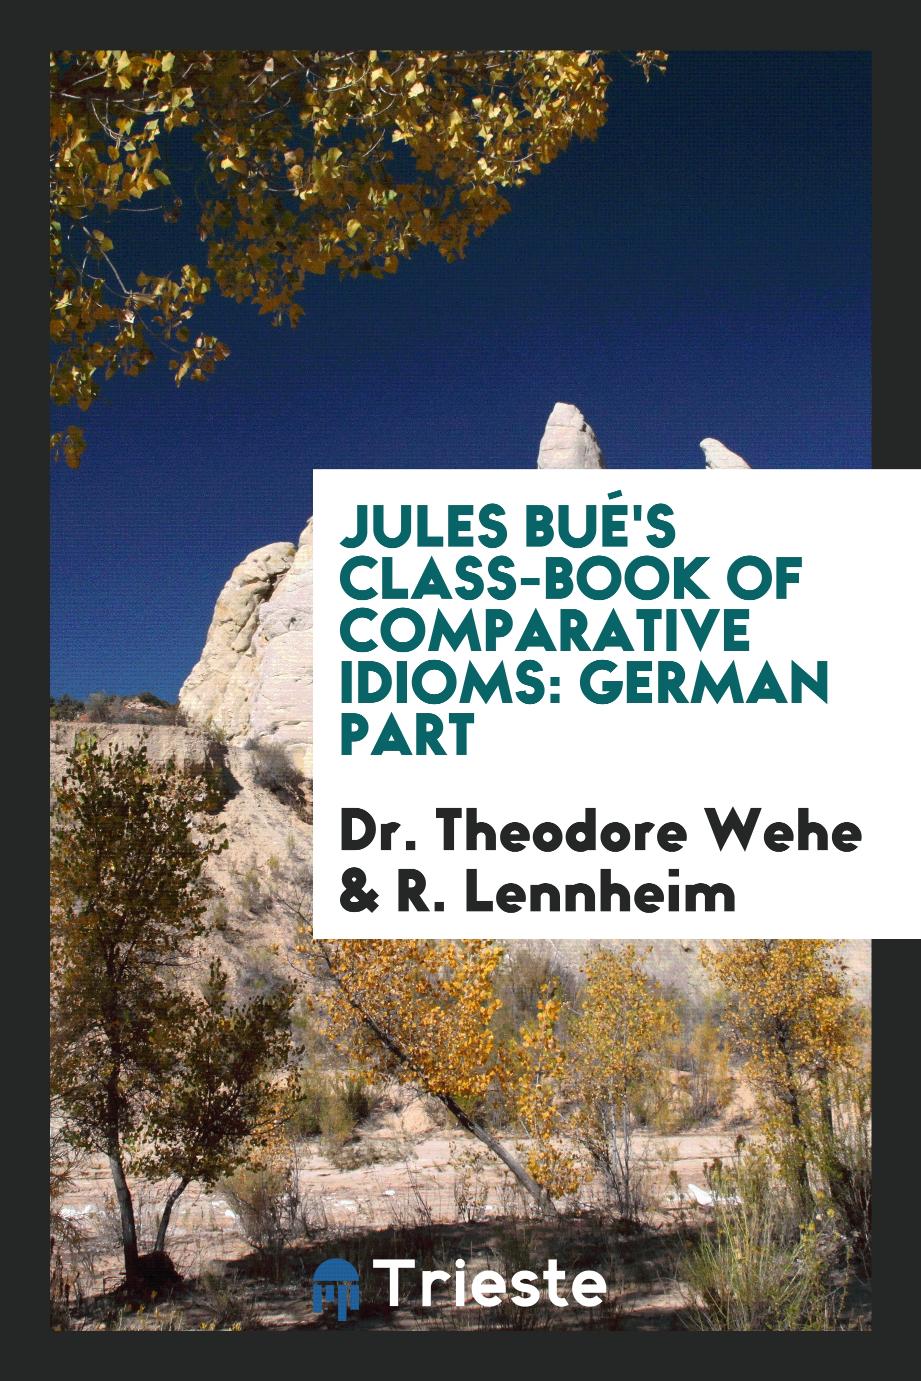 Jules Bué's Class-Book of Comparative Idioms: German Part